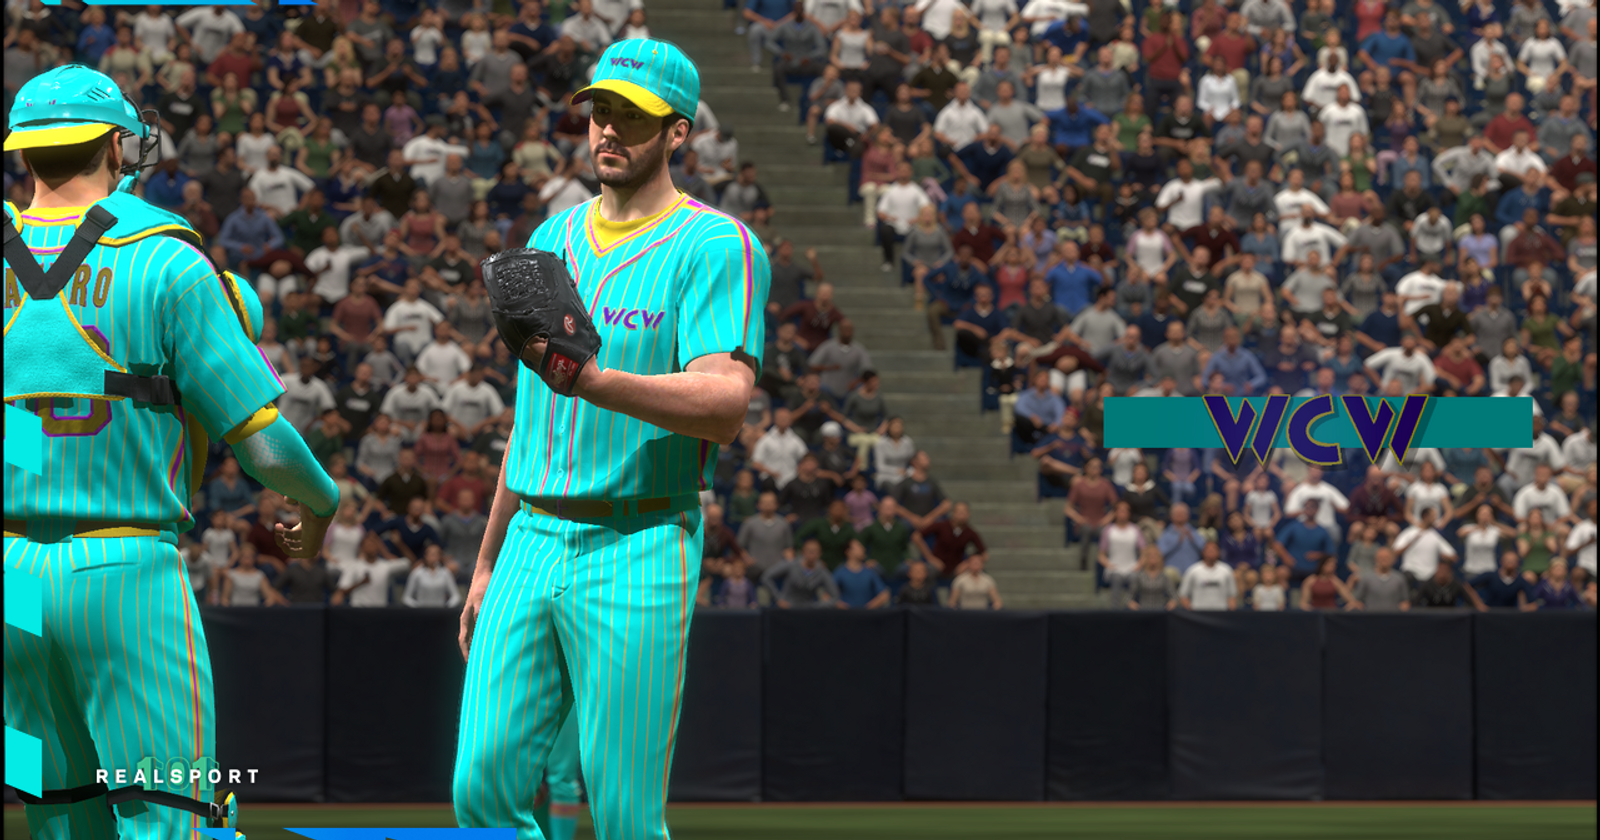 MLB The Show 21: Franchise Mode Survival Guide - Best Teams, How